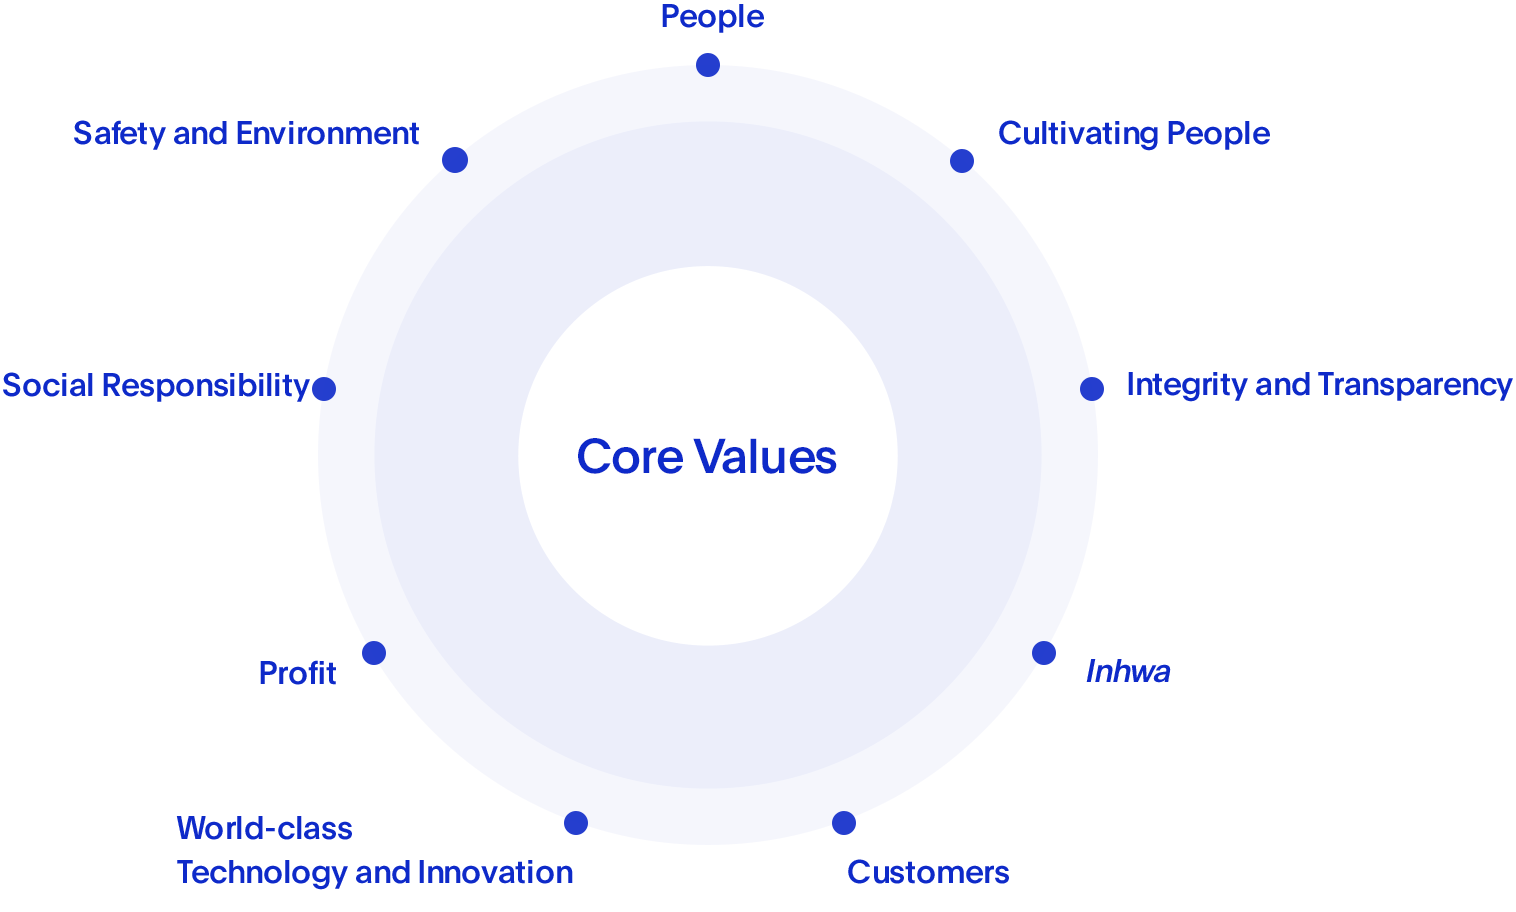 Core Values - People, Inhwa, Profit, Cultivating People, World-class Technology and Innovation, Social Responsibility, Integrity and Transparency, Customers, Safety and Environment